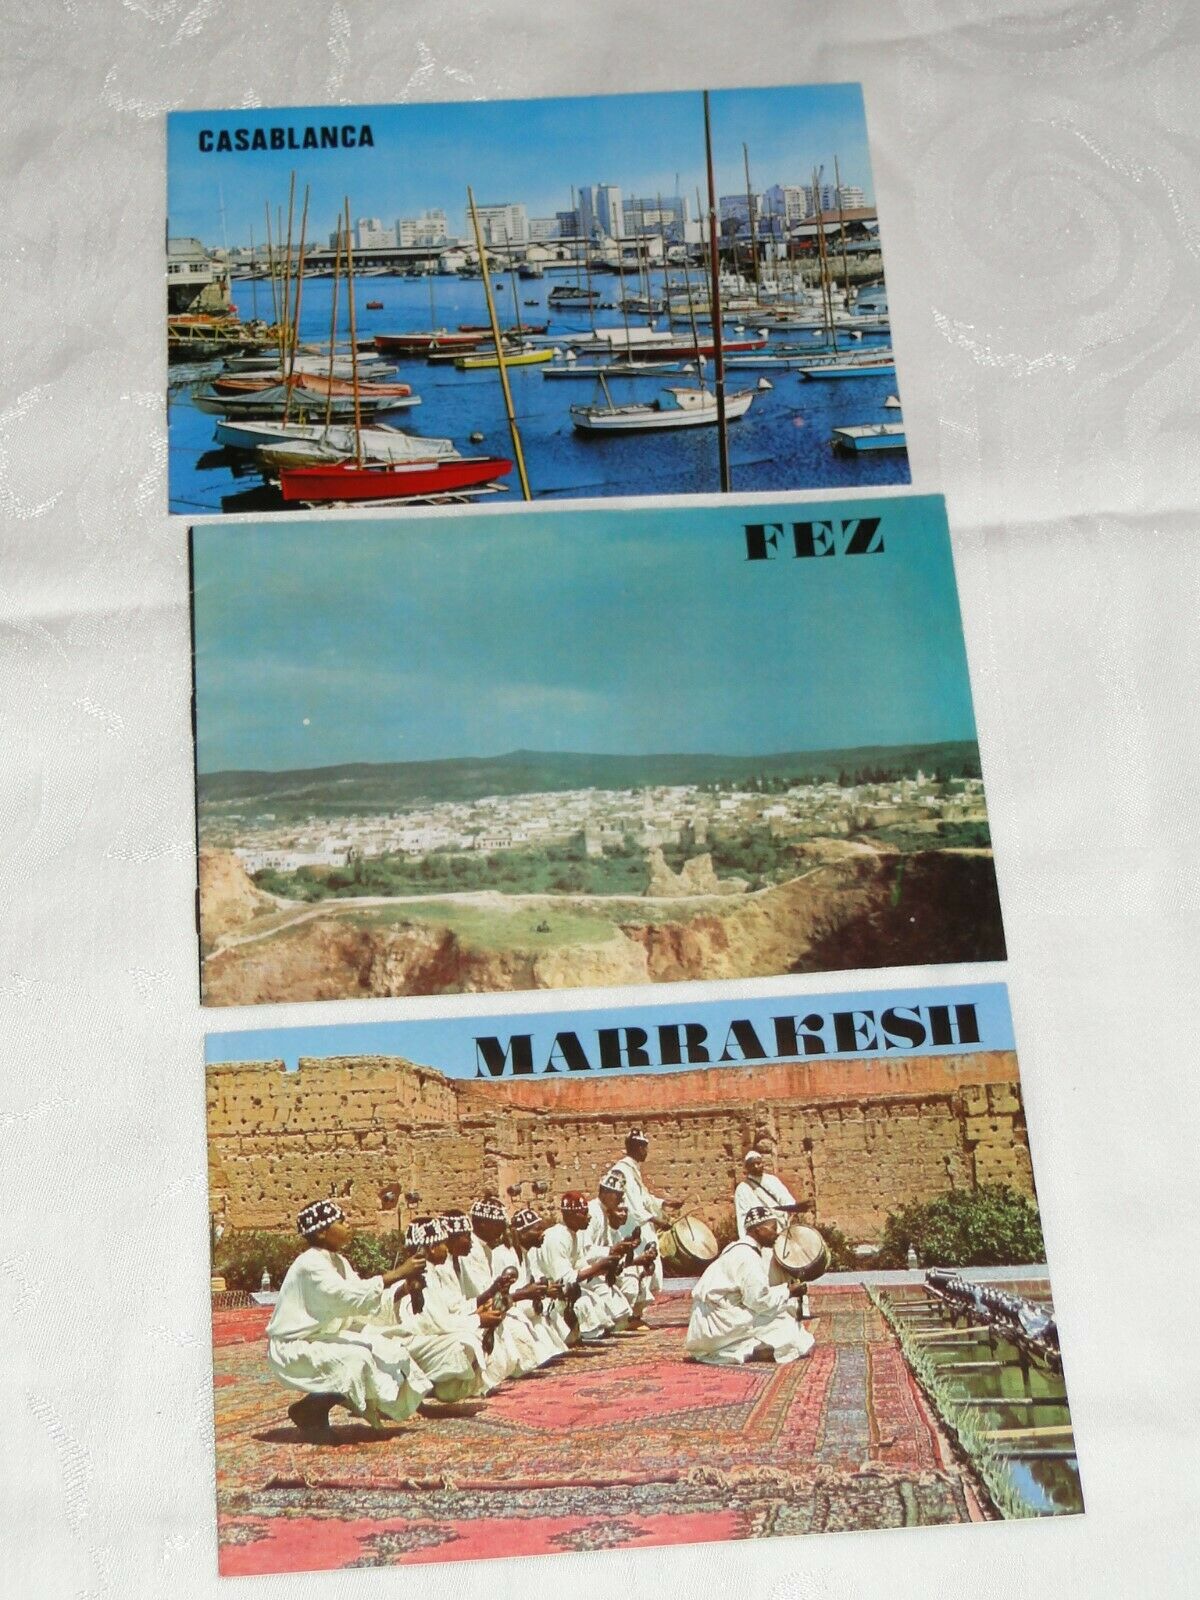 Lot of 3 Morocco City Tourist Guides from 1990s -  Casablanca, Fez & Marrakesh